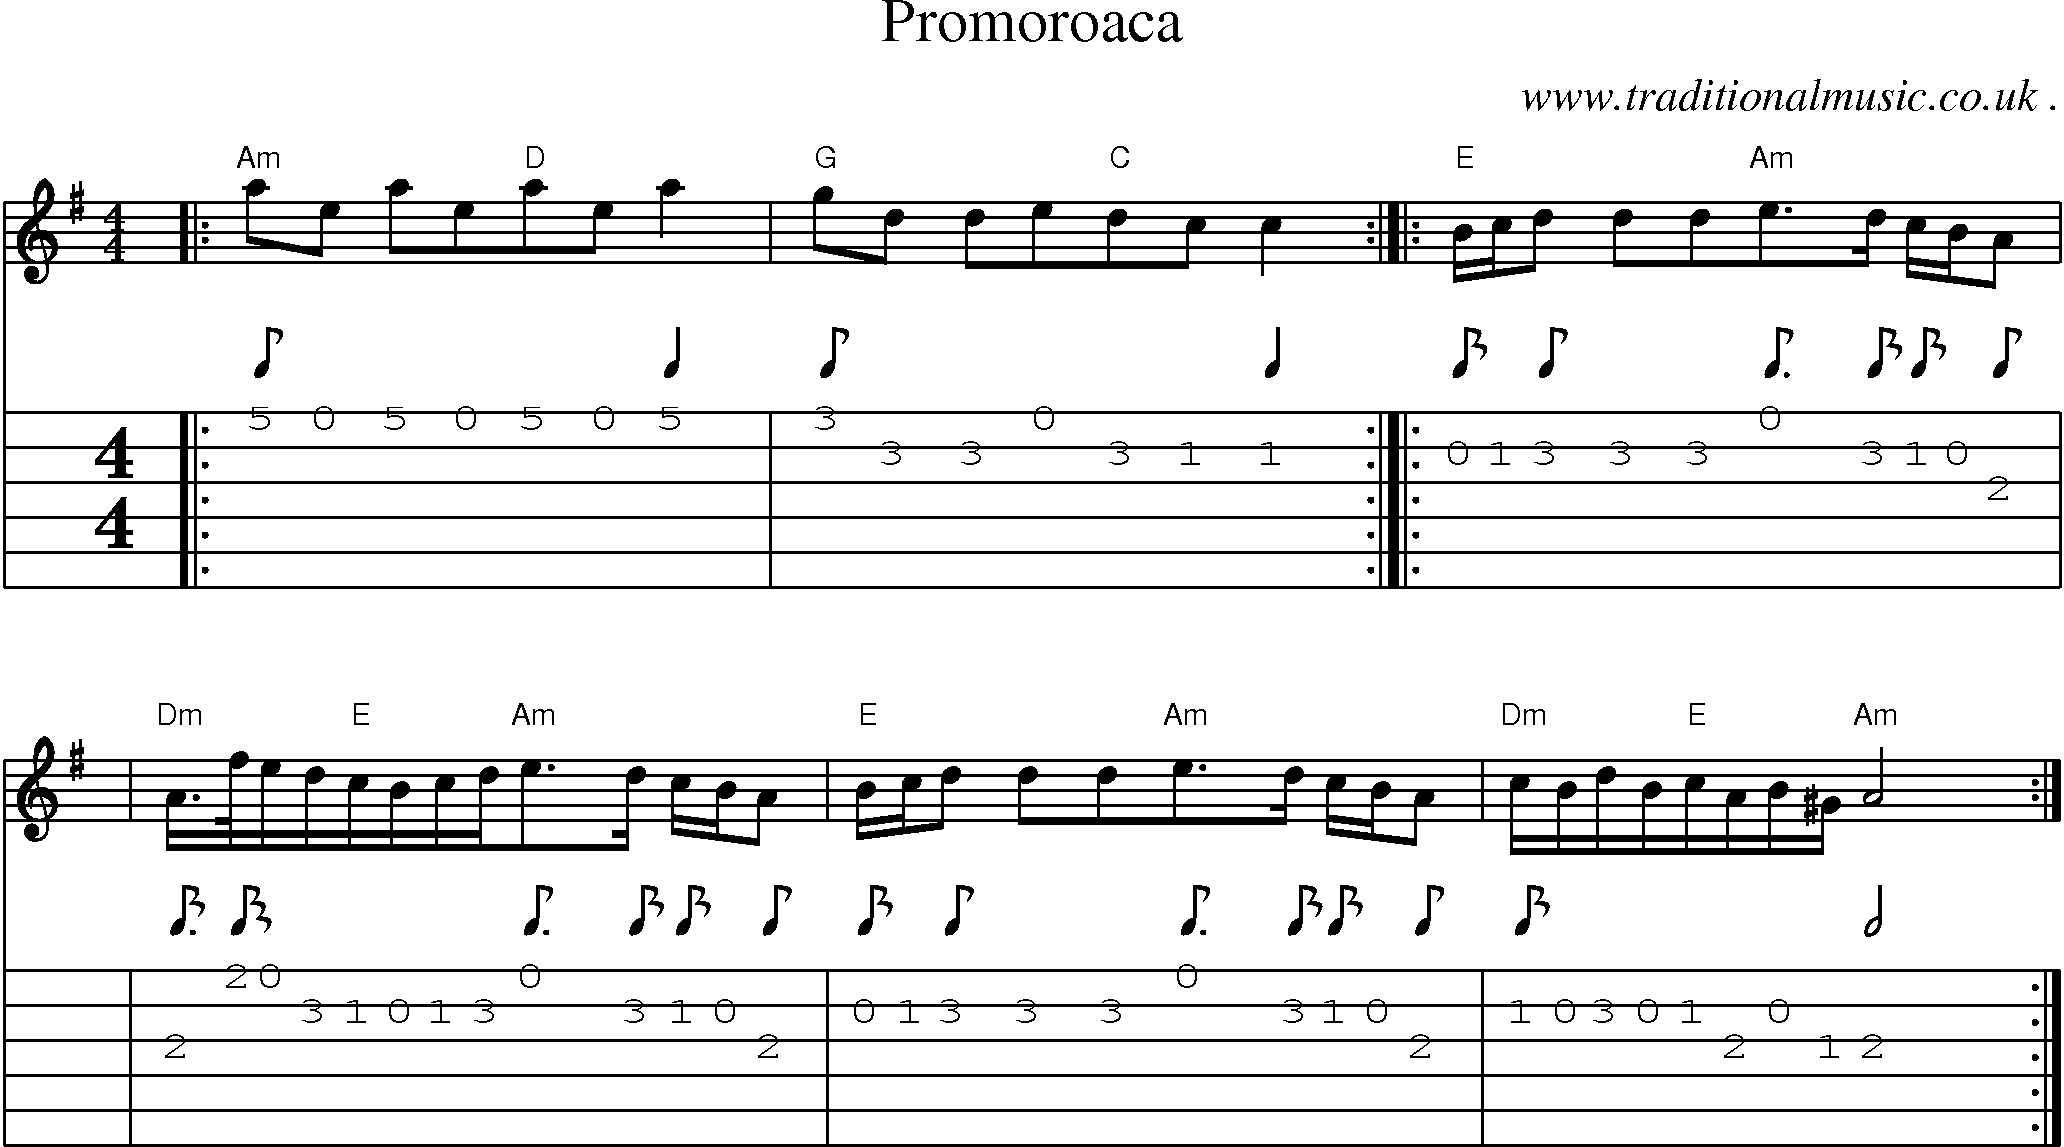 Sheet-Music and Guitar Tabs for Promoroaca